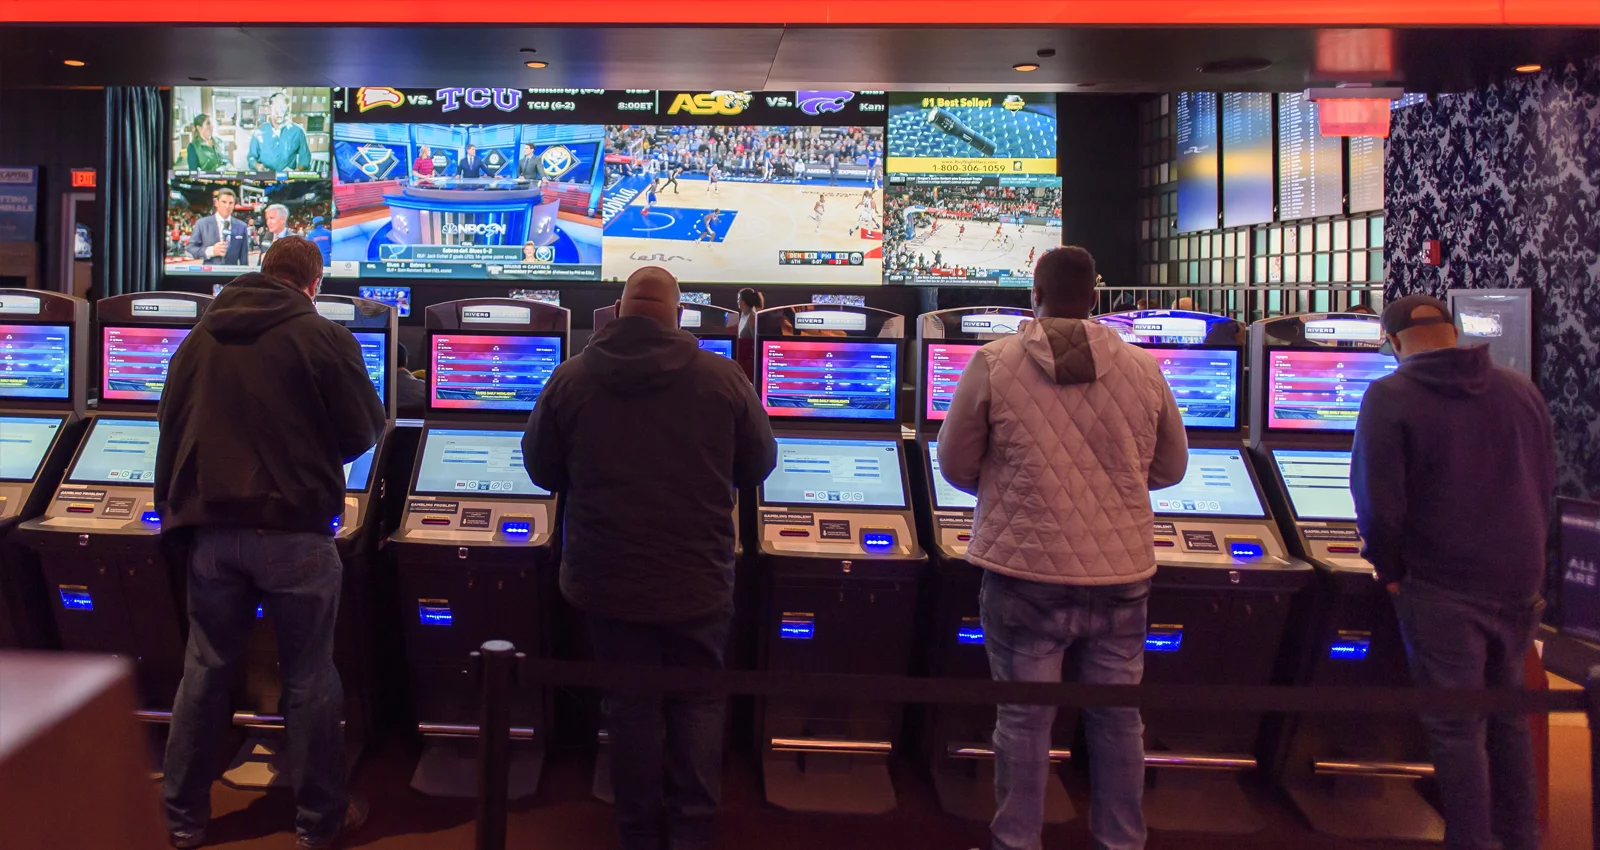 Rivers Spoortsbook sports betting at Rivers Casino & Resort. | Photo Courtesy of Andrew Shinn